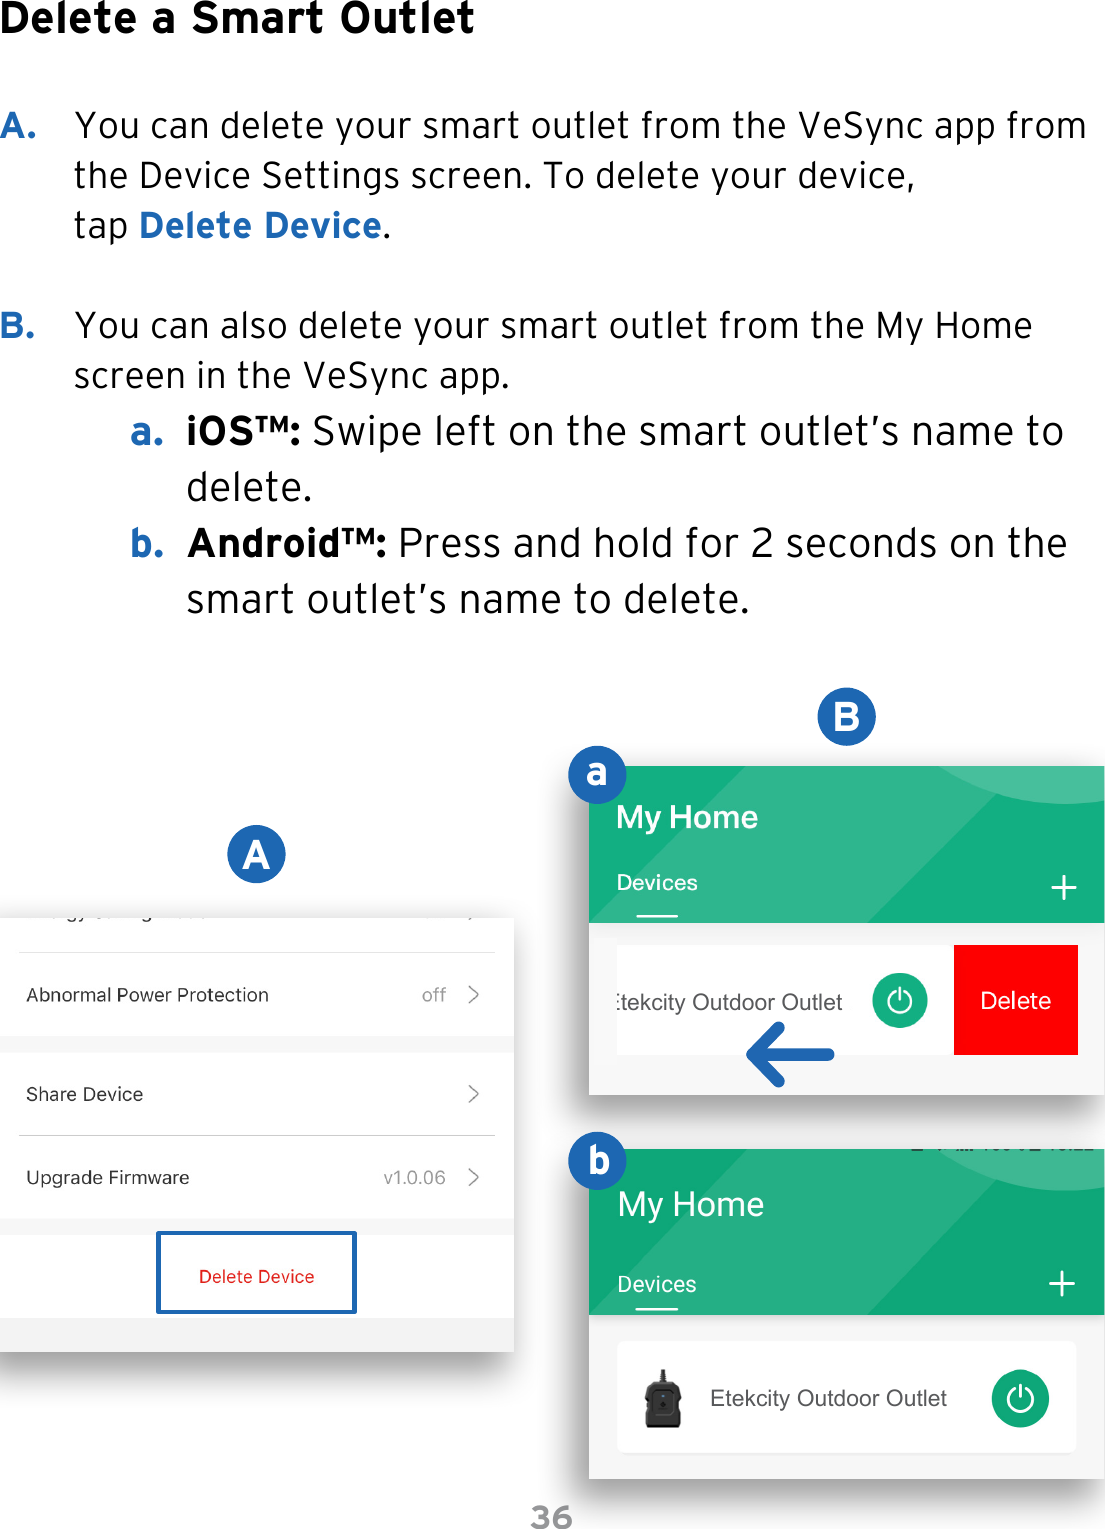 36Delete a Smart OutletA.  You can delete your smart outlet from the VeSync app from the Device Settings screen. To delete your device, tap Delete Device. B.  You can also delete your smart outlet from the My Home screen in the VeSync app.a.  iOS™: Swipe left on the smart outlet’s name to delete.b.  Android™: Press and hold for 2 seconds on the smart outlet’s name to delete.ABabEtekcity Outdoor OutletEtekcity Outdoor Outlet